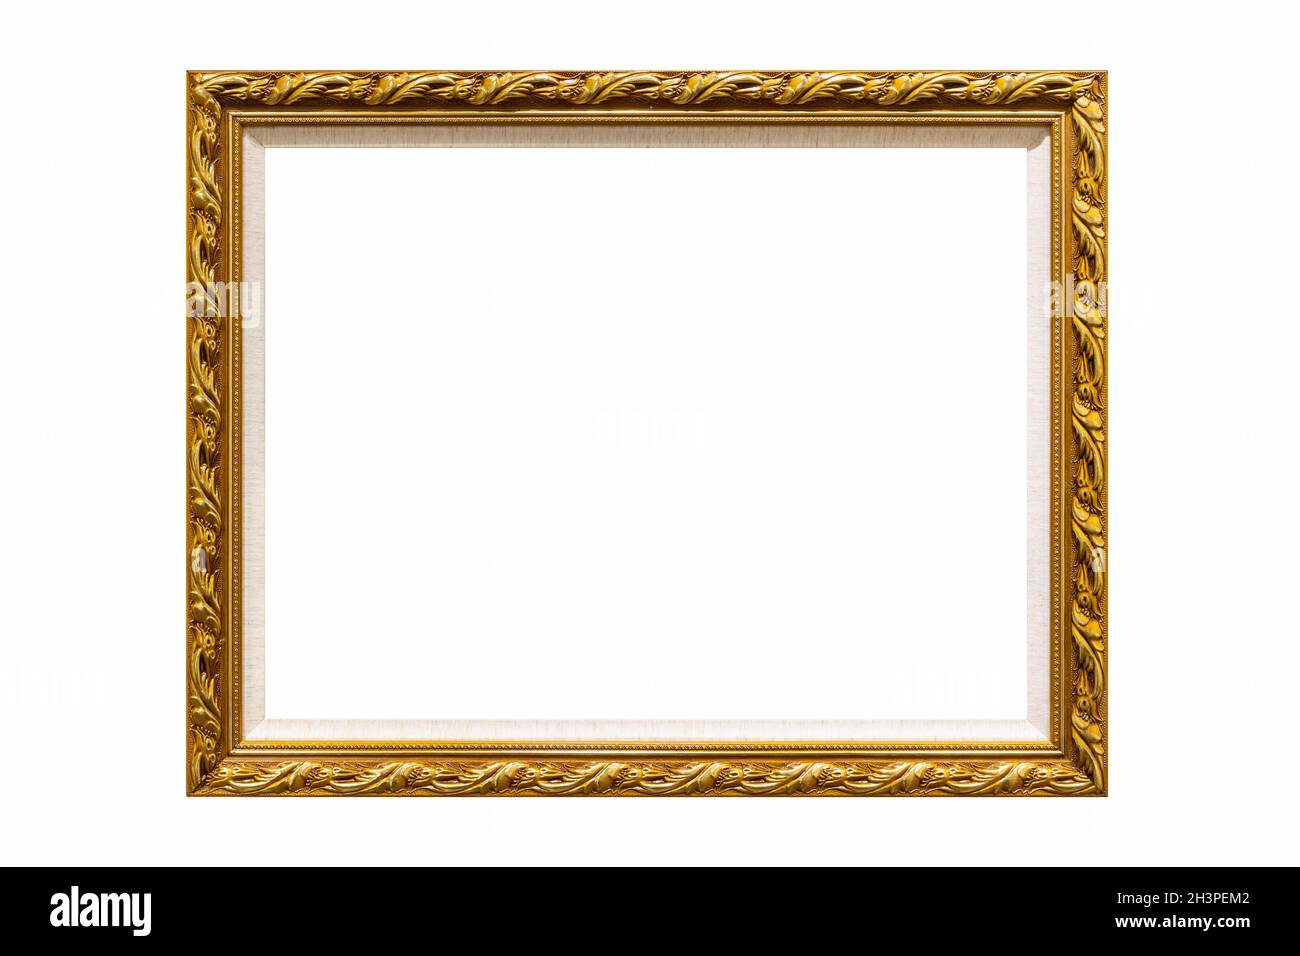 Golden retro picture frame isolated Stock Photo